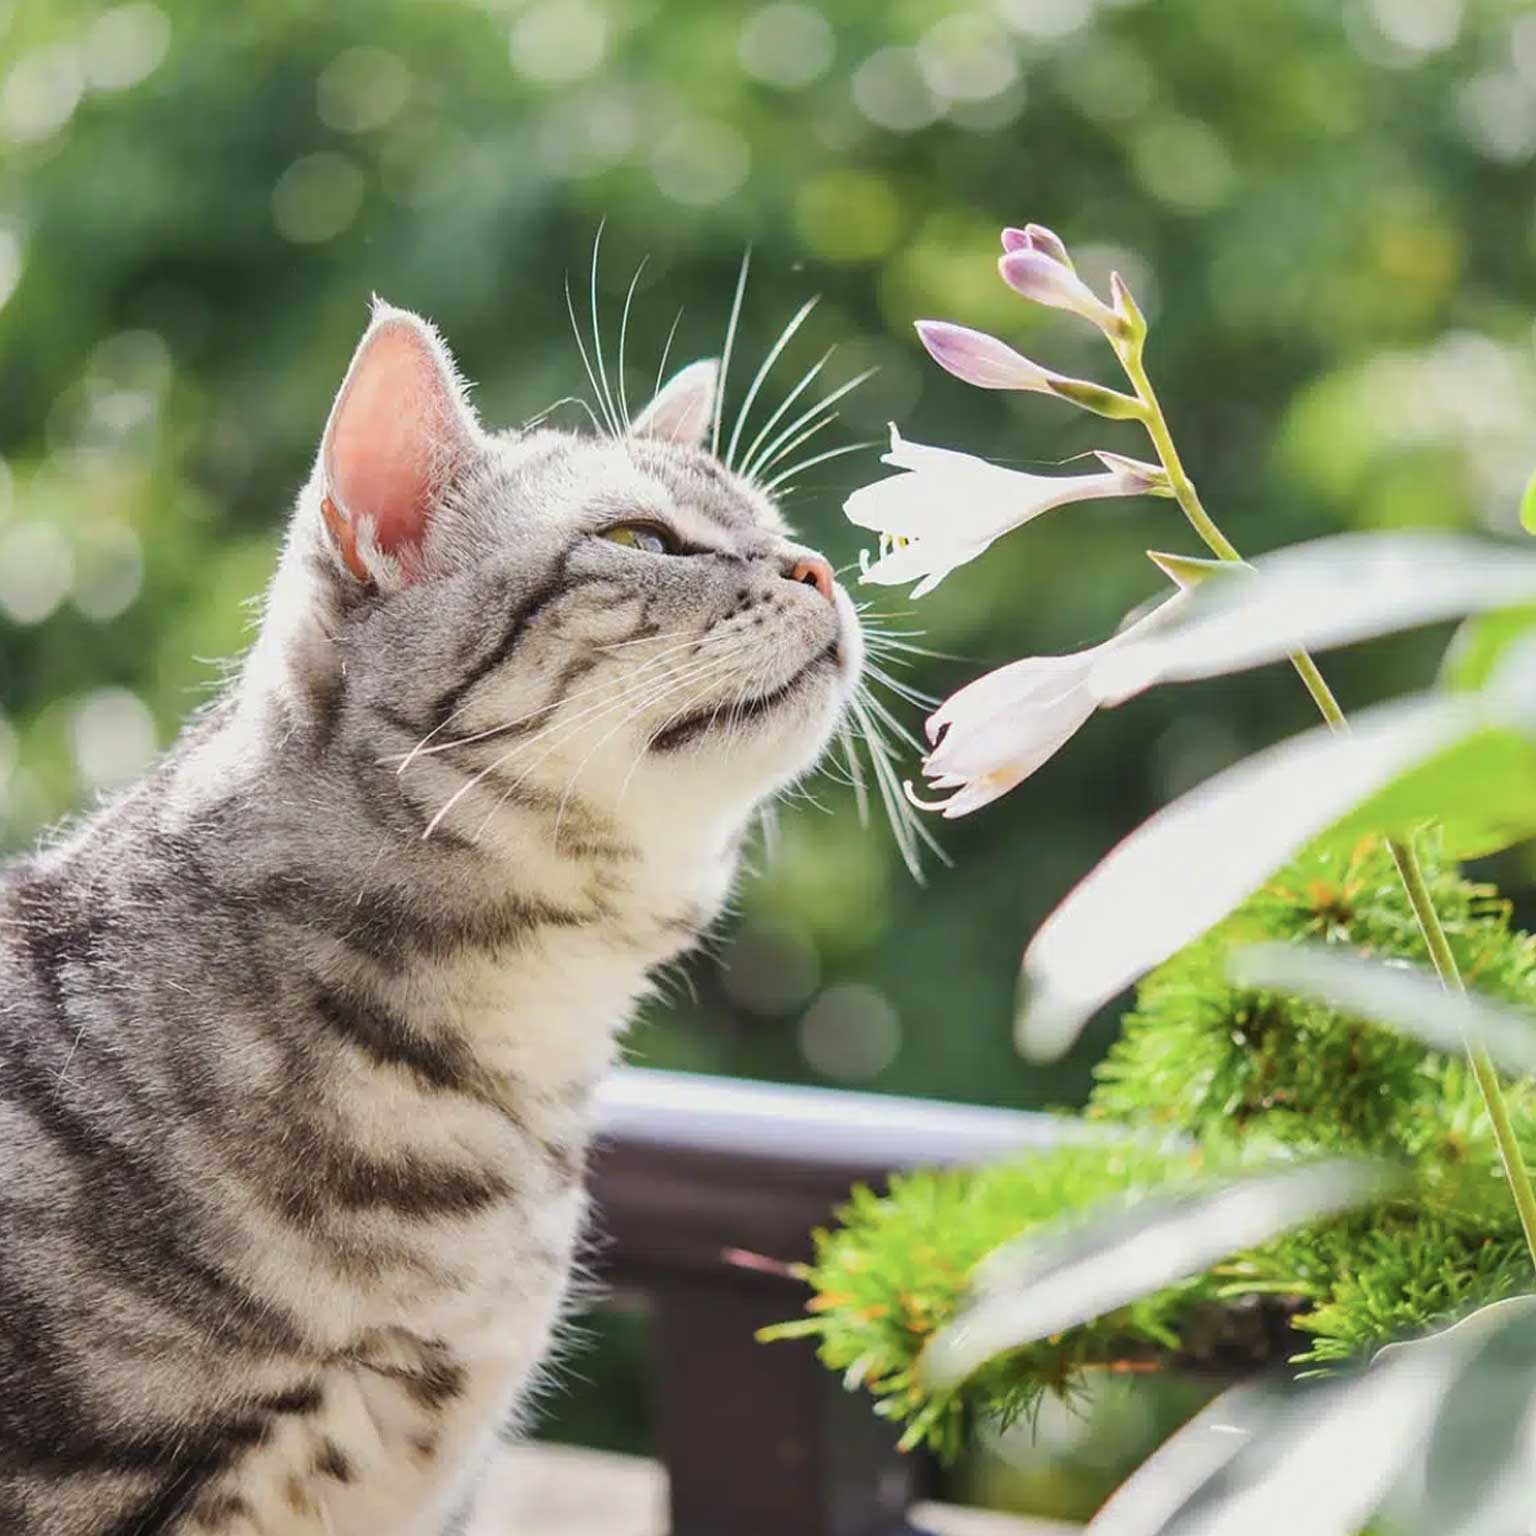 Cats and flowers